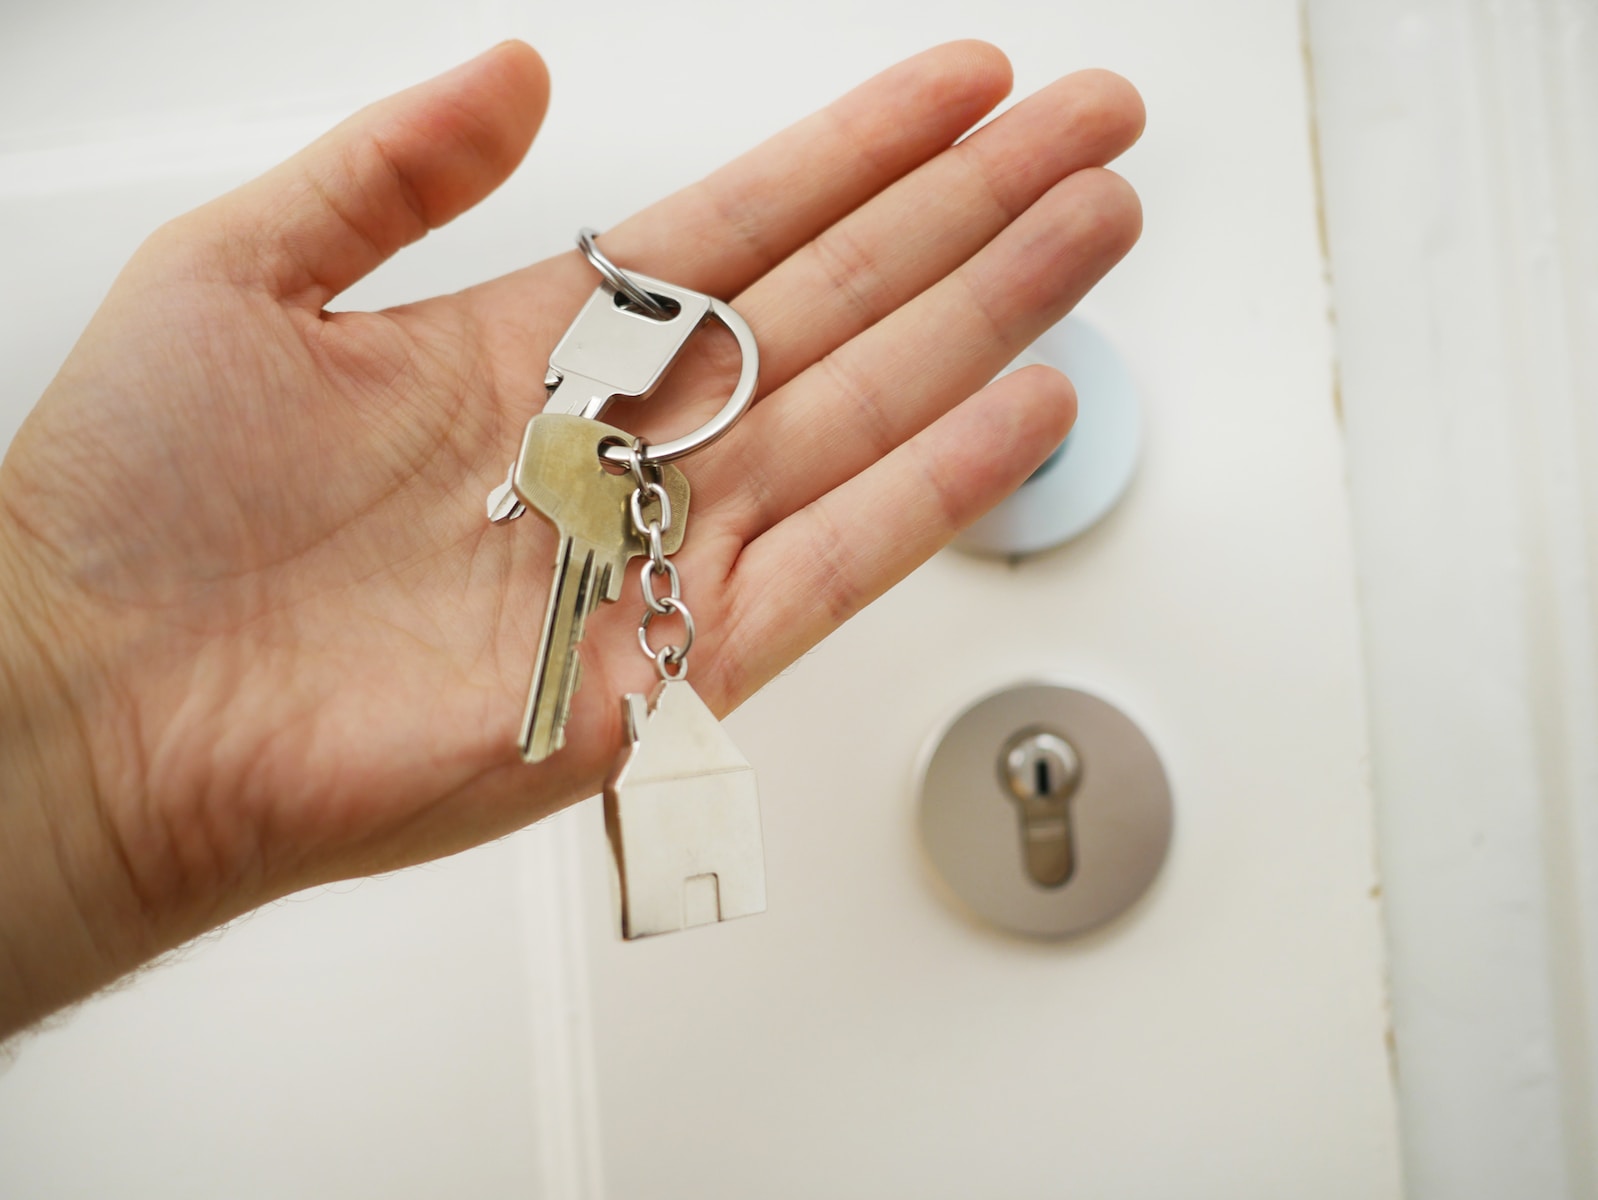 Emergency Locksmith in Charlotte: How to Find the Best Locksmith Service in an Emergency